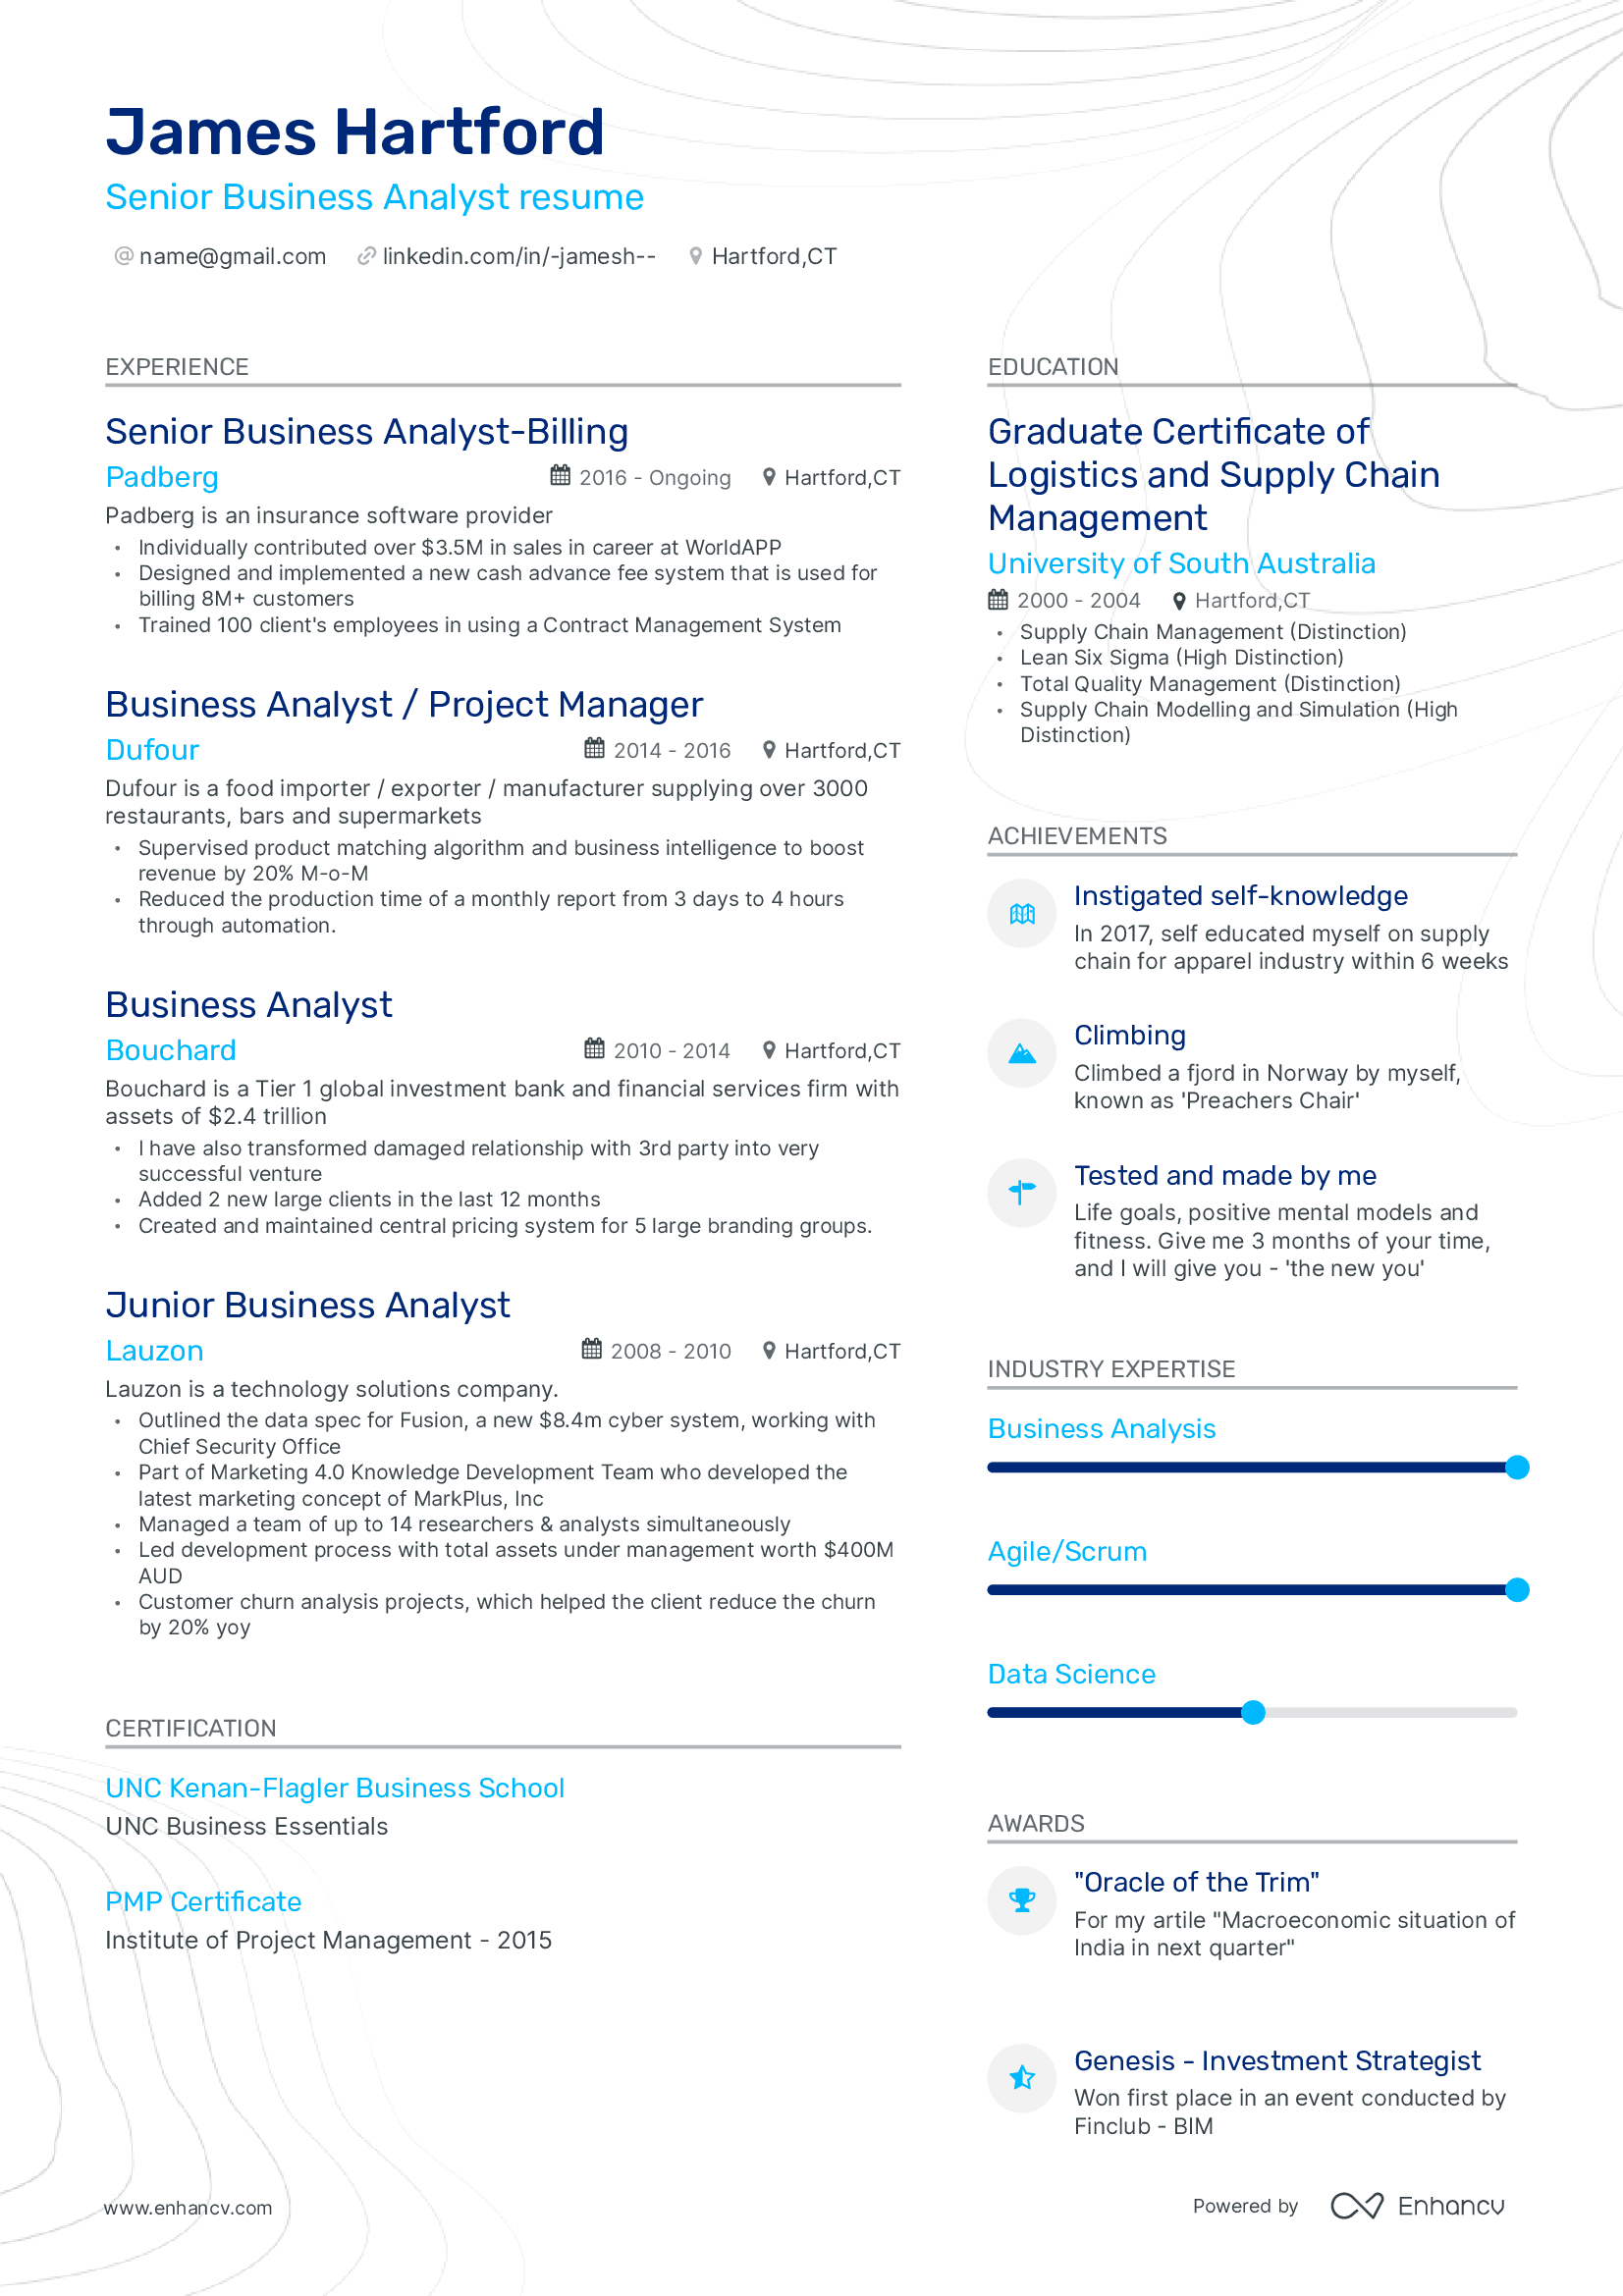 Senior Business Analyst resume.png